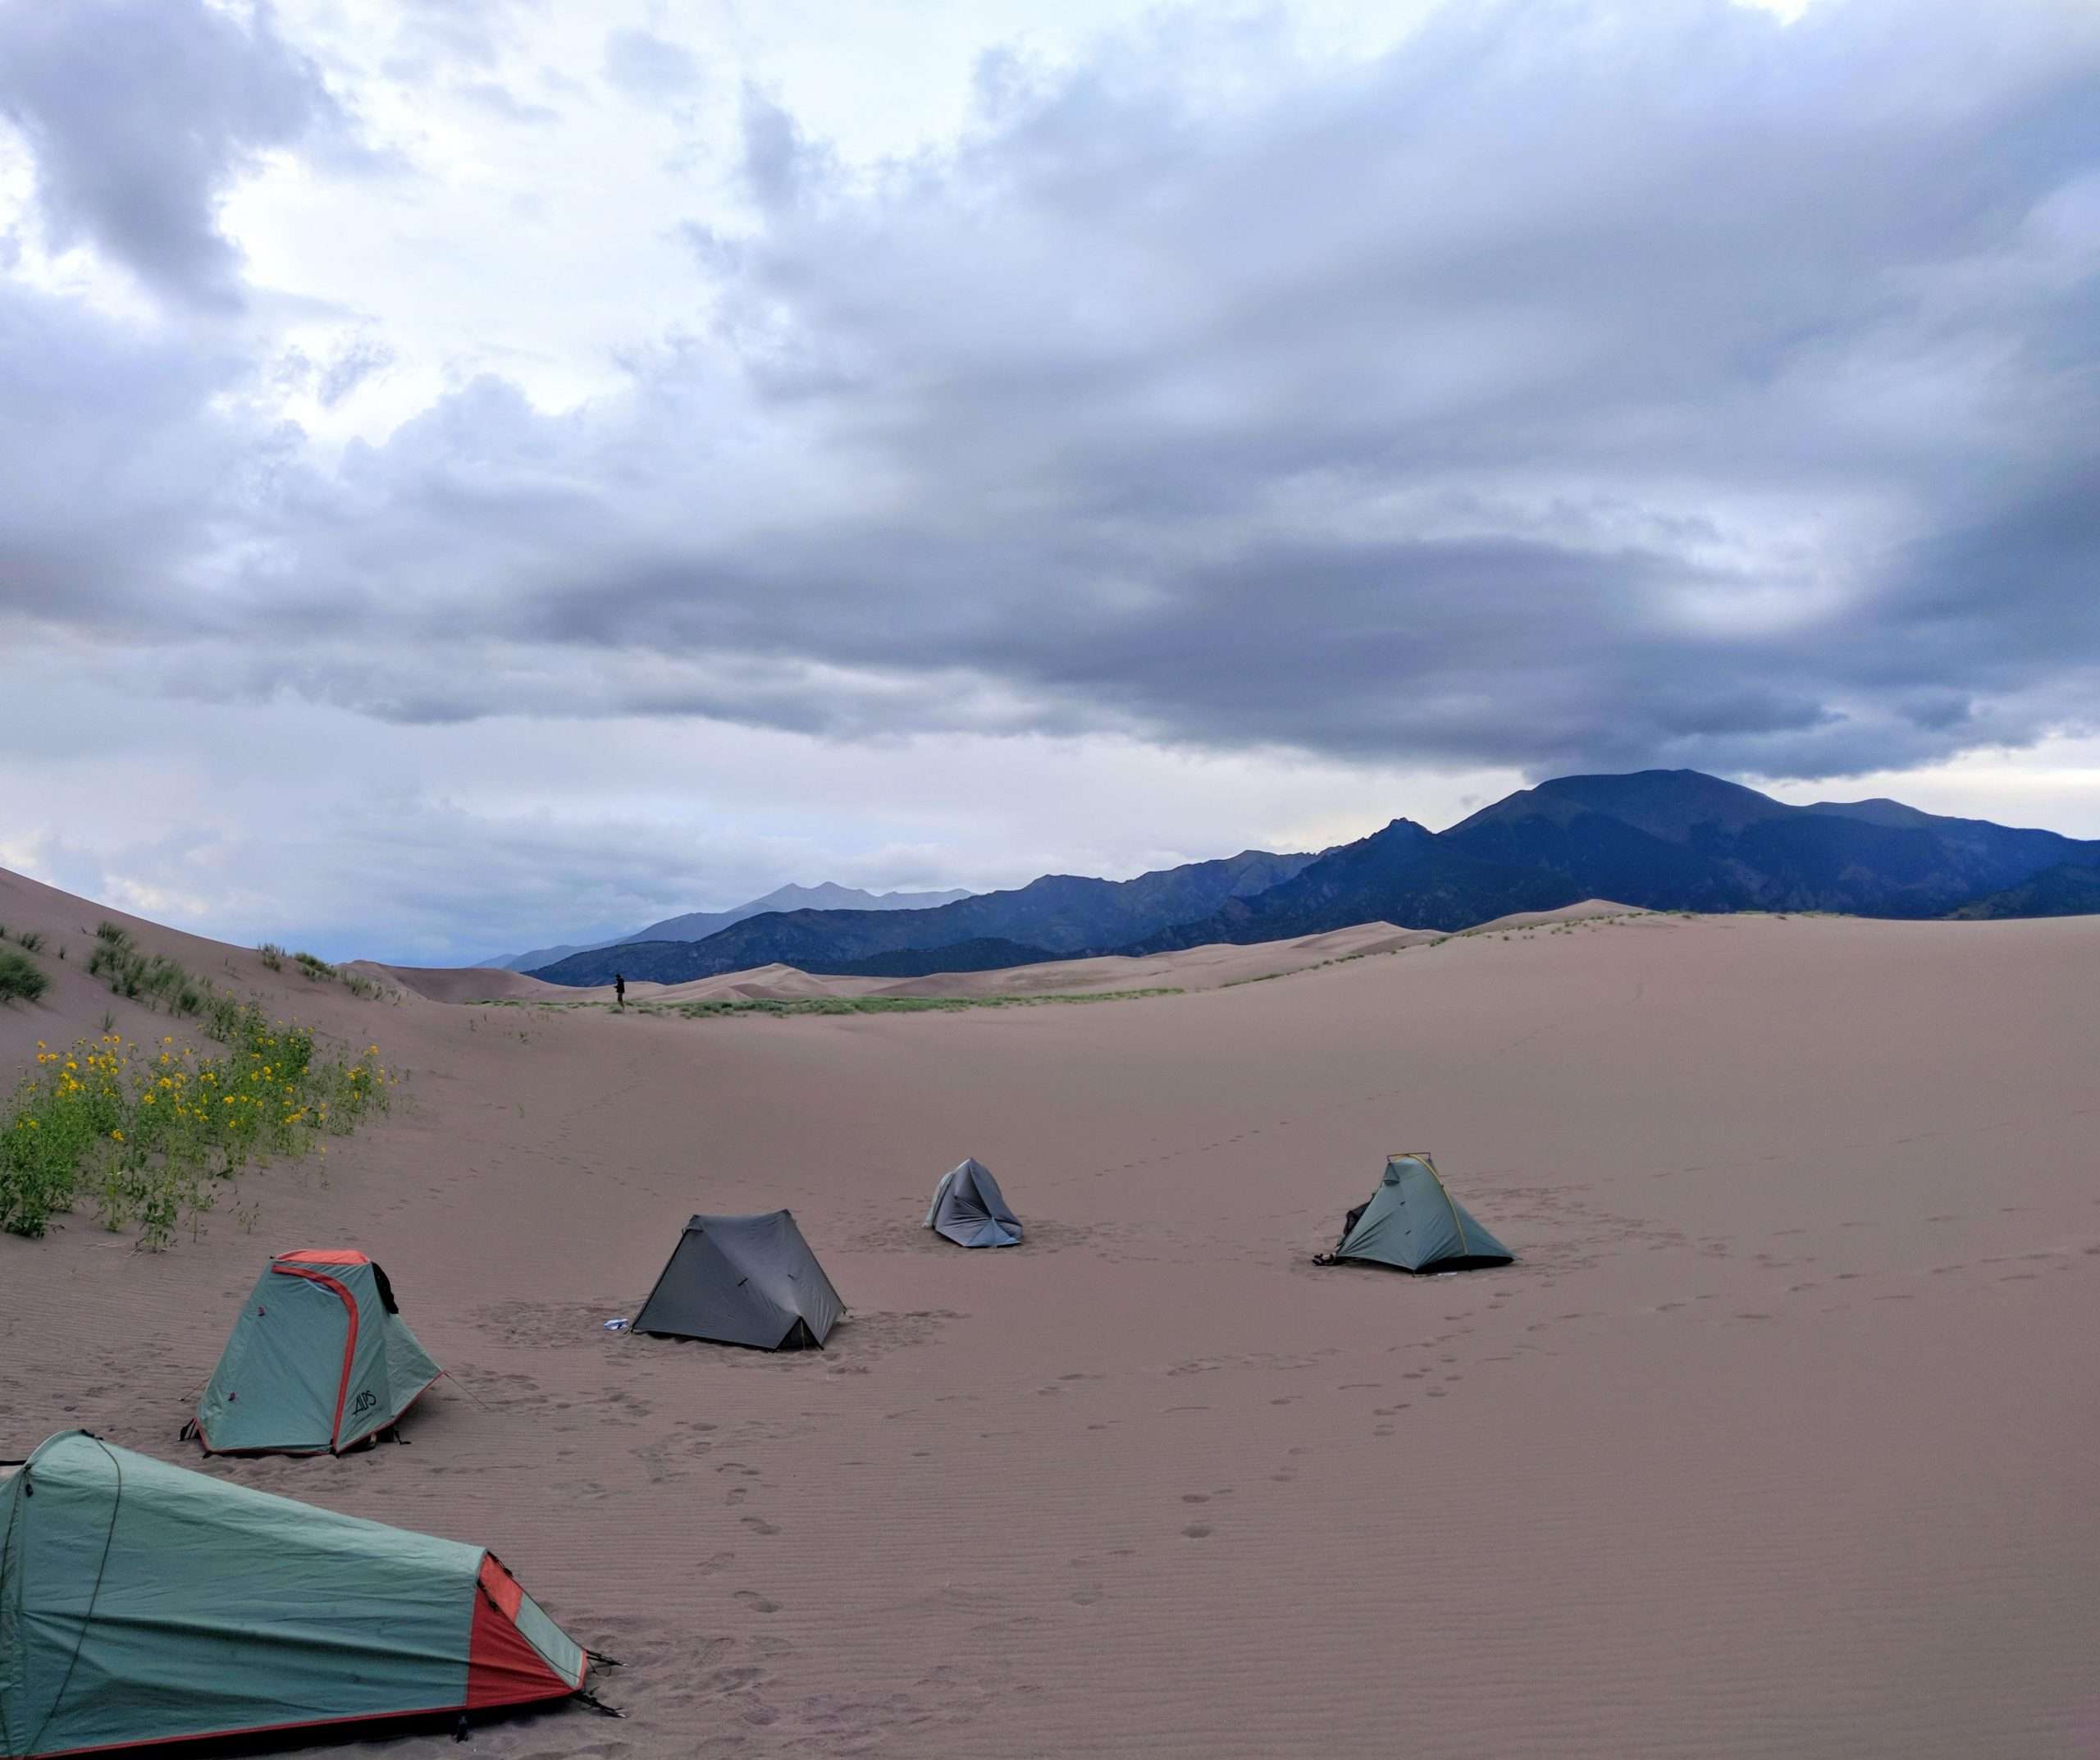 Camping in Great Sand Dunes National Park last Saturday ...